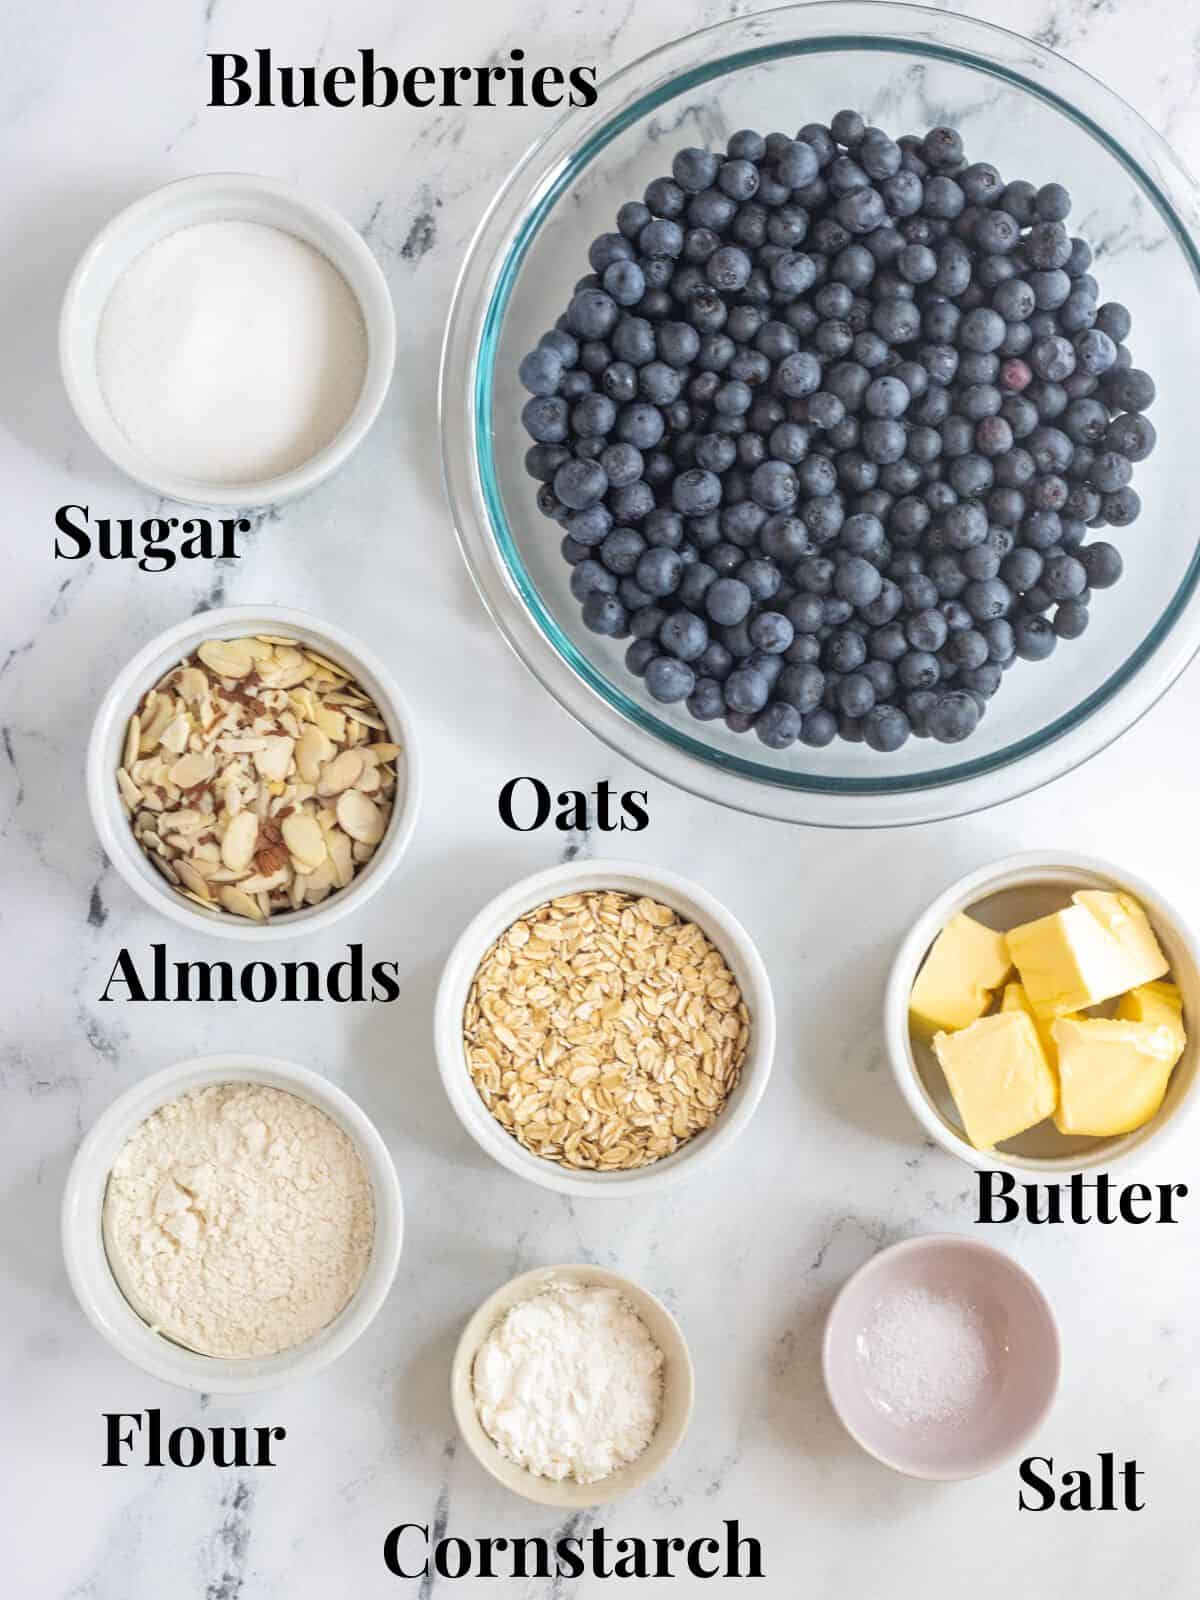 Ingredients for blueberry crisp in bowls with labels.